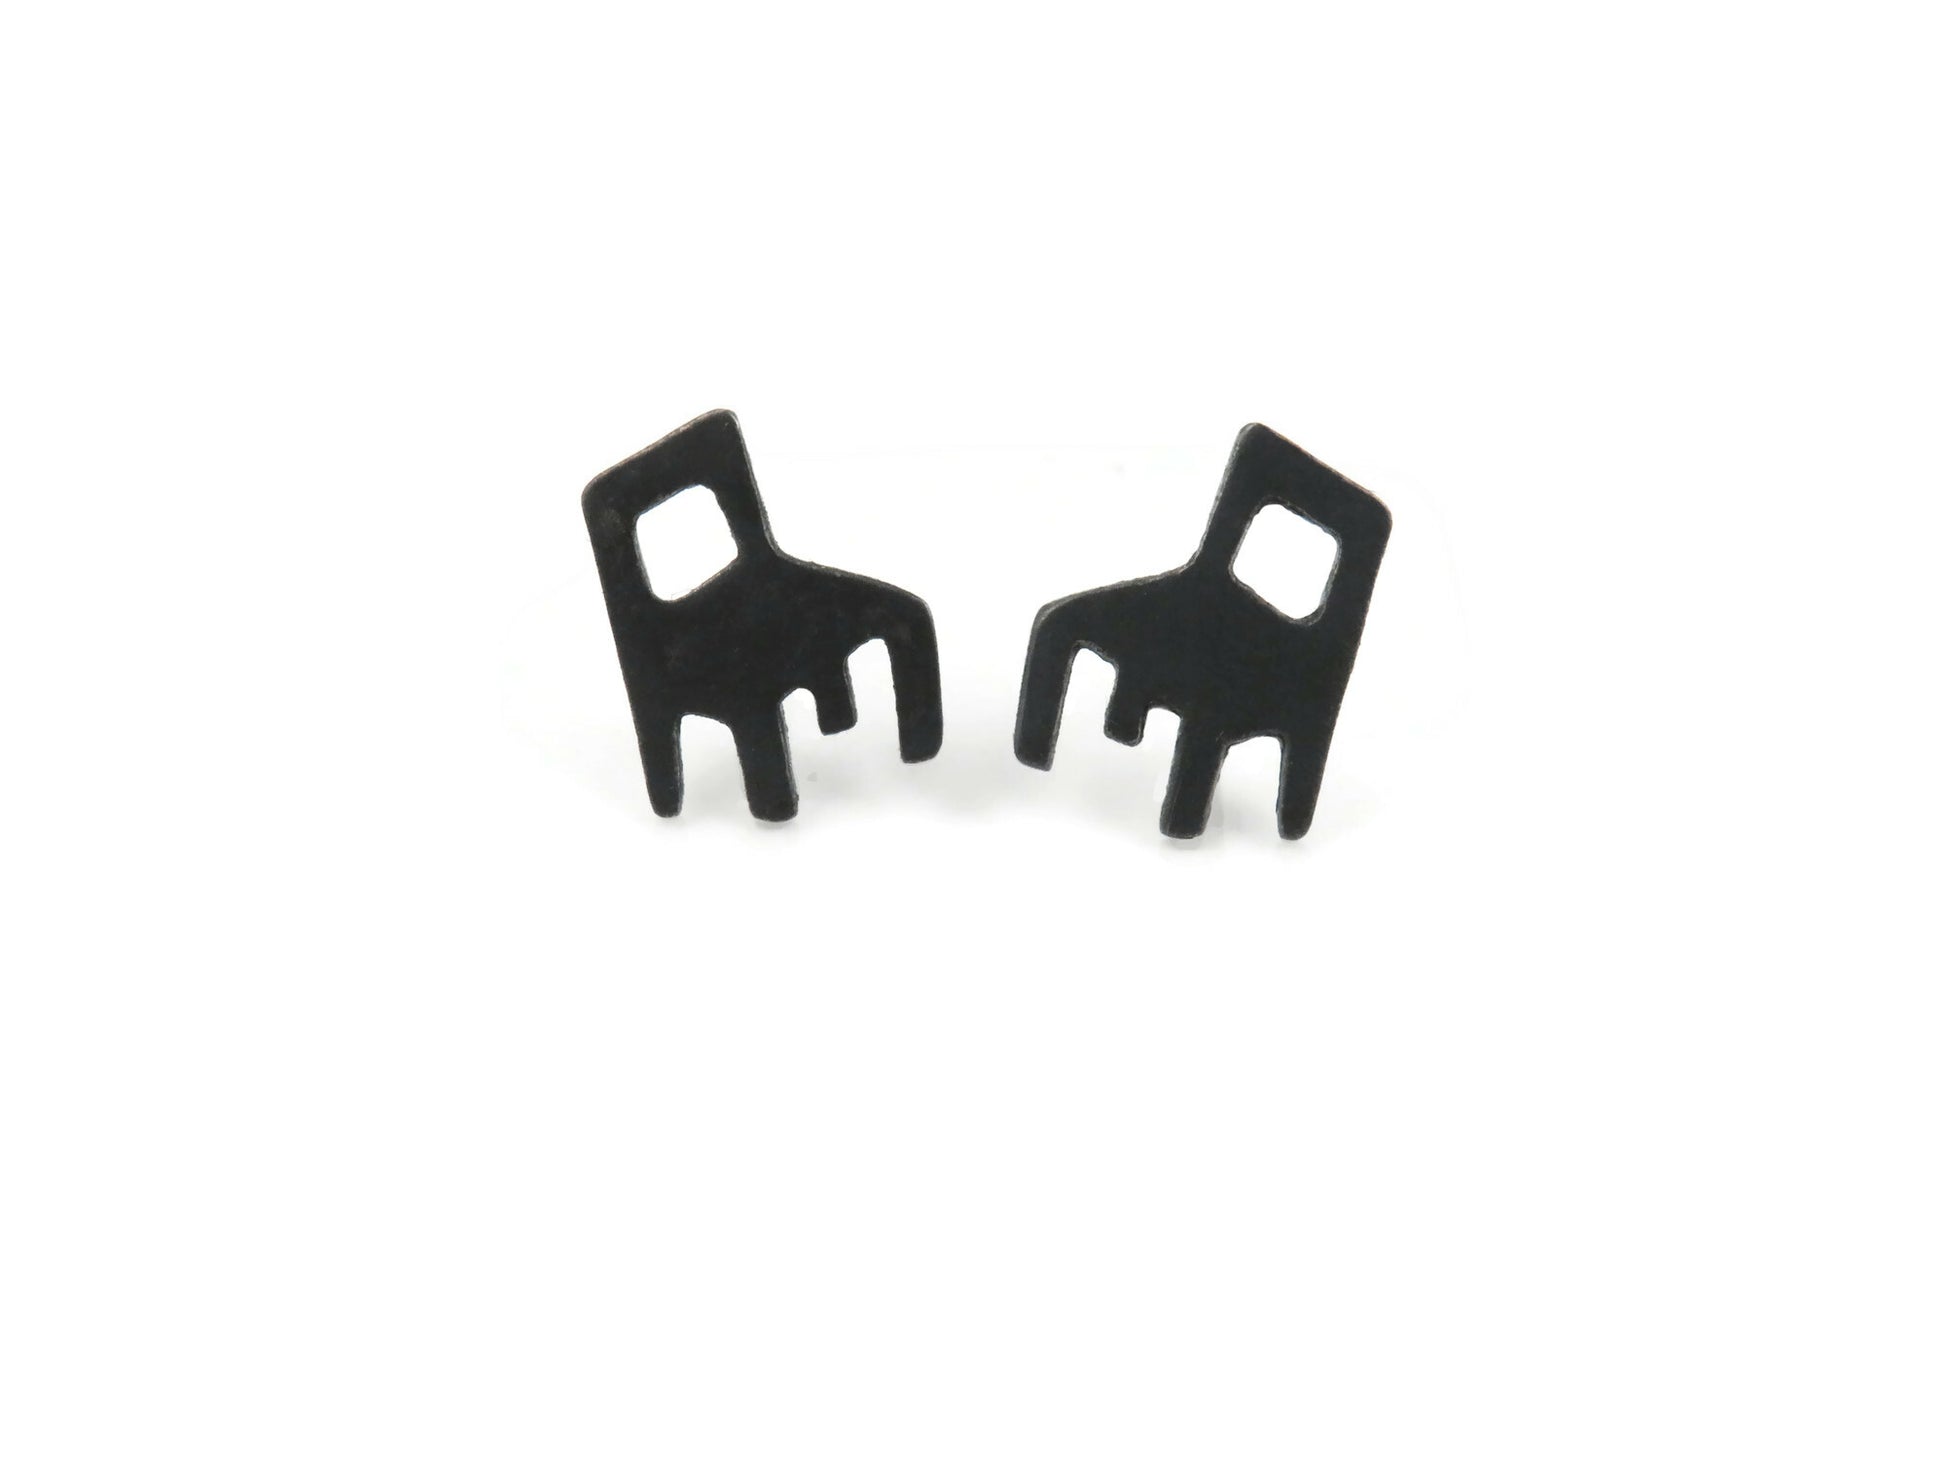 Tiny Chair Oxidized Silver Stud Earrings